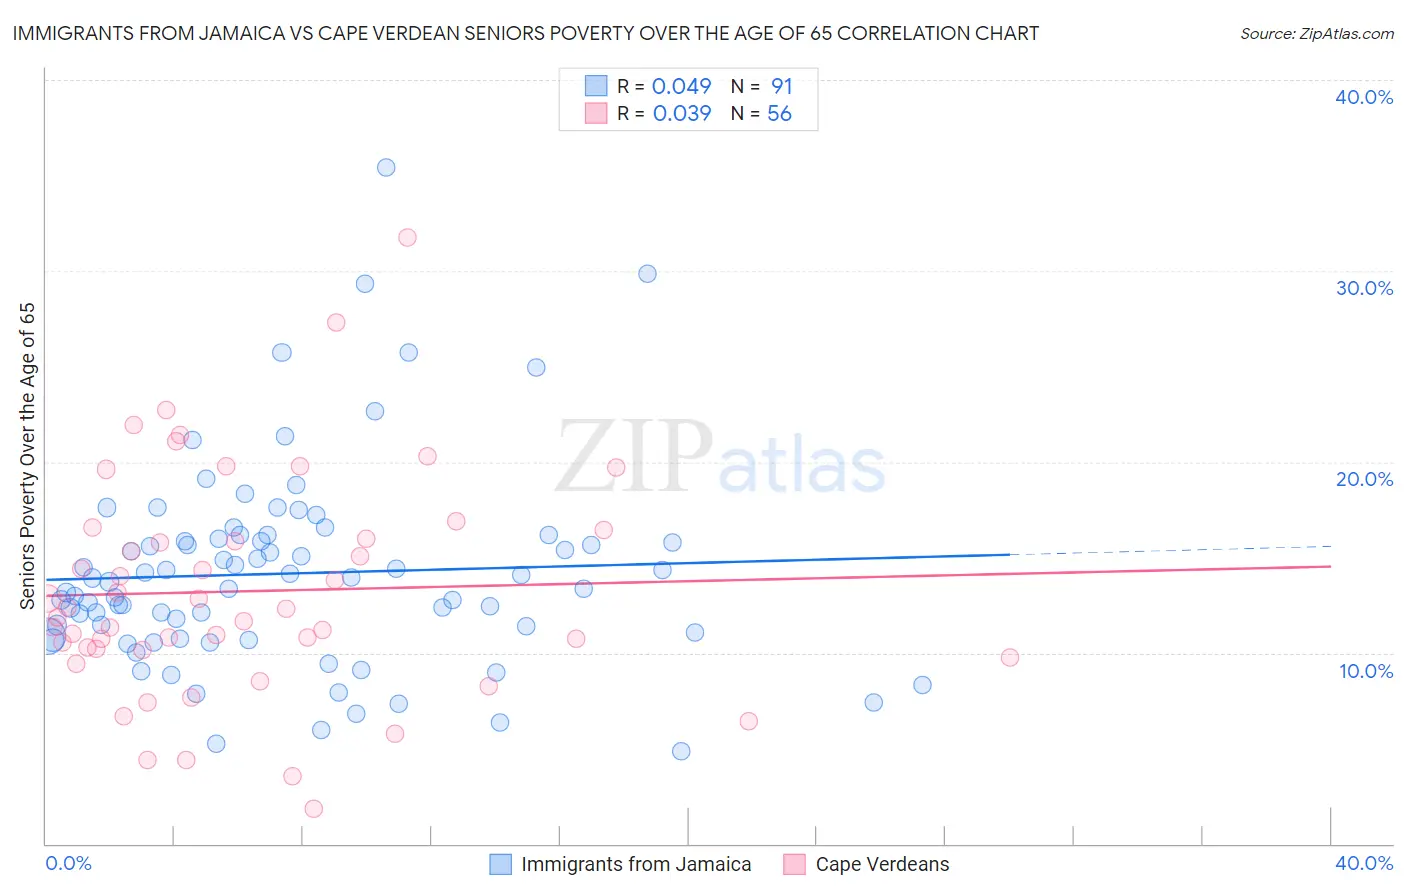 Immigrants from Jamaica vs Cape Verdean Seniors Poverty Over the Age of 65